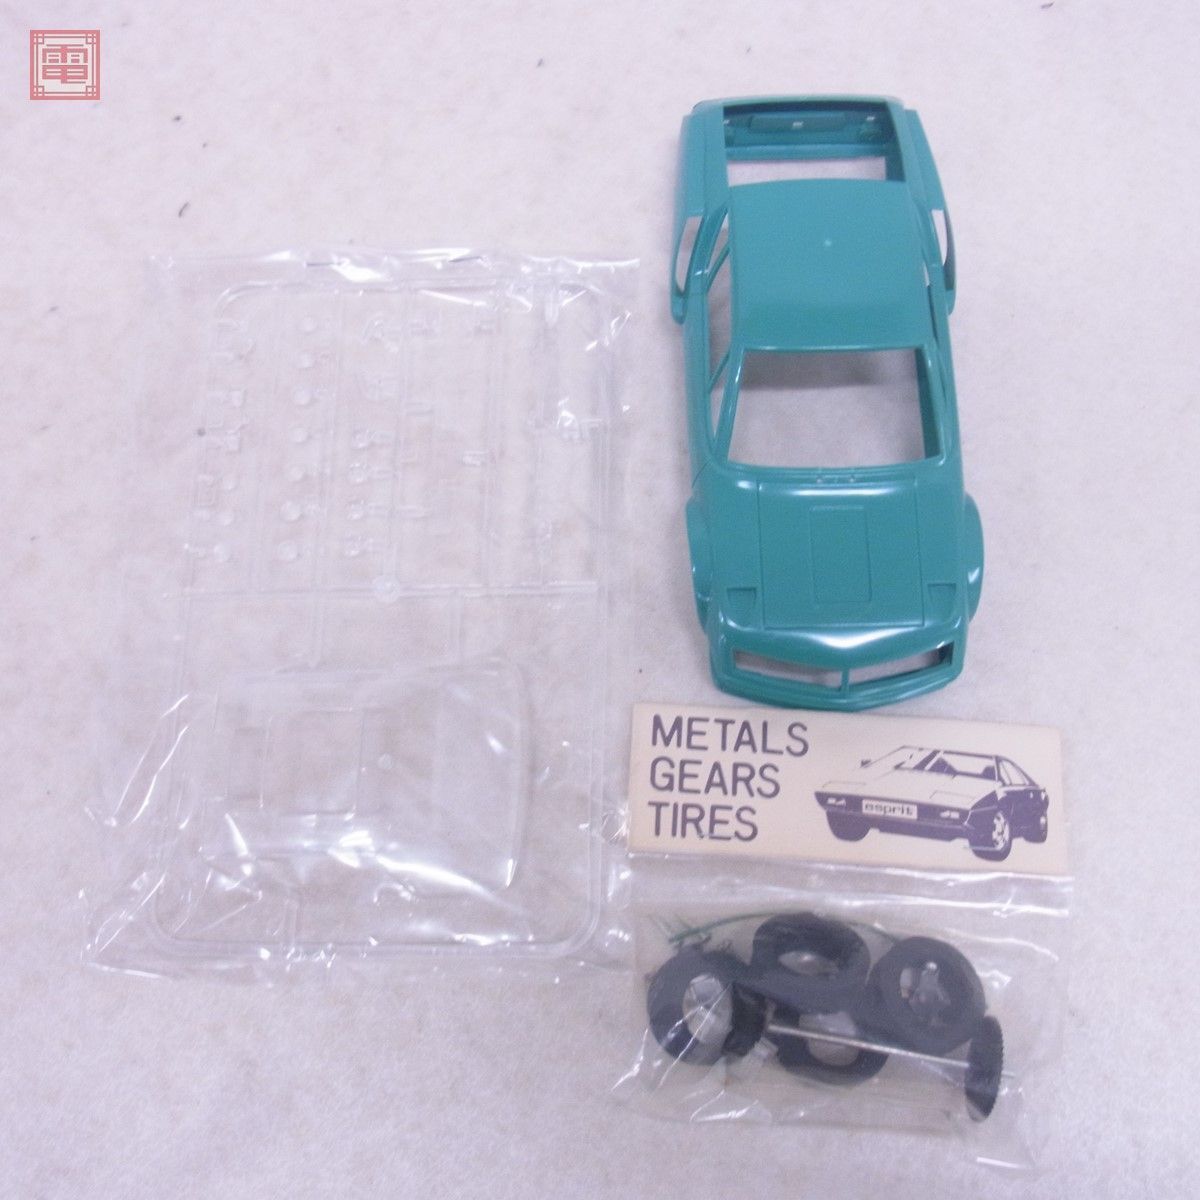  not yet constructed nichimo1/24 alpine Renault A310 Nichimo memorial car collection ALPINE RENAULT[20